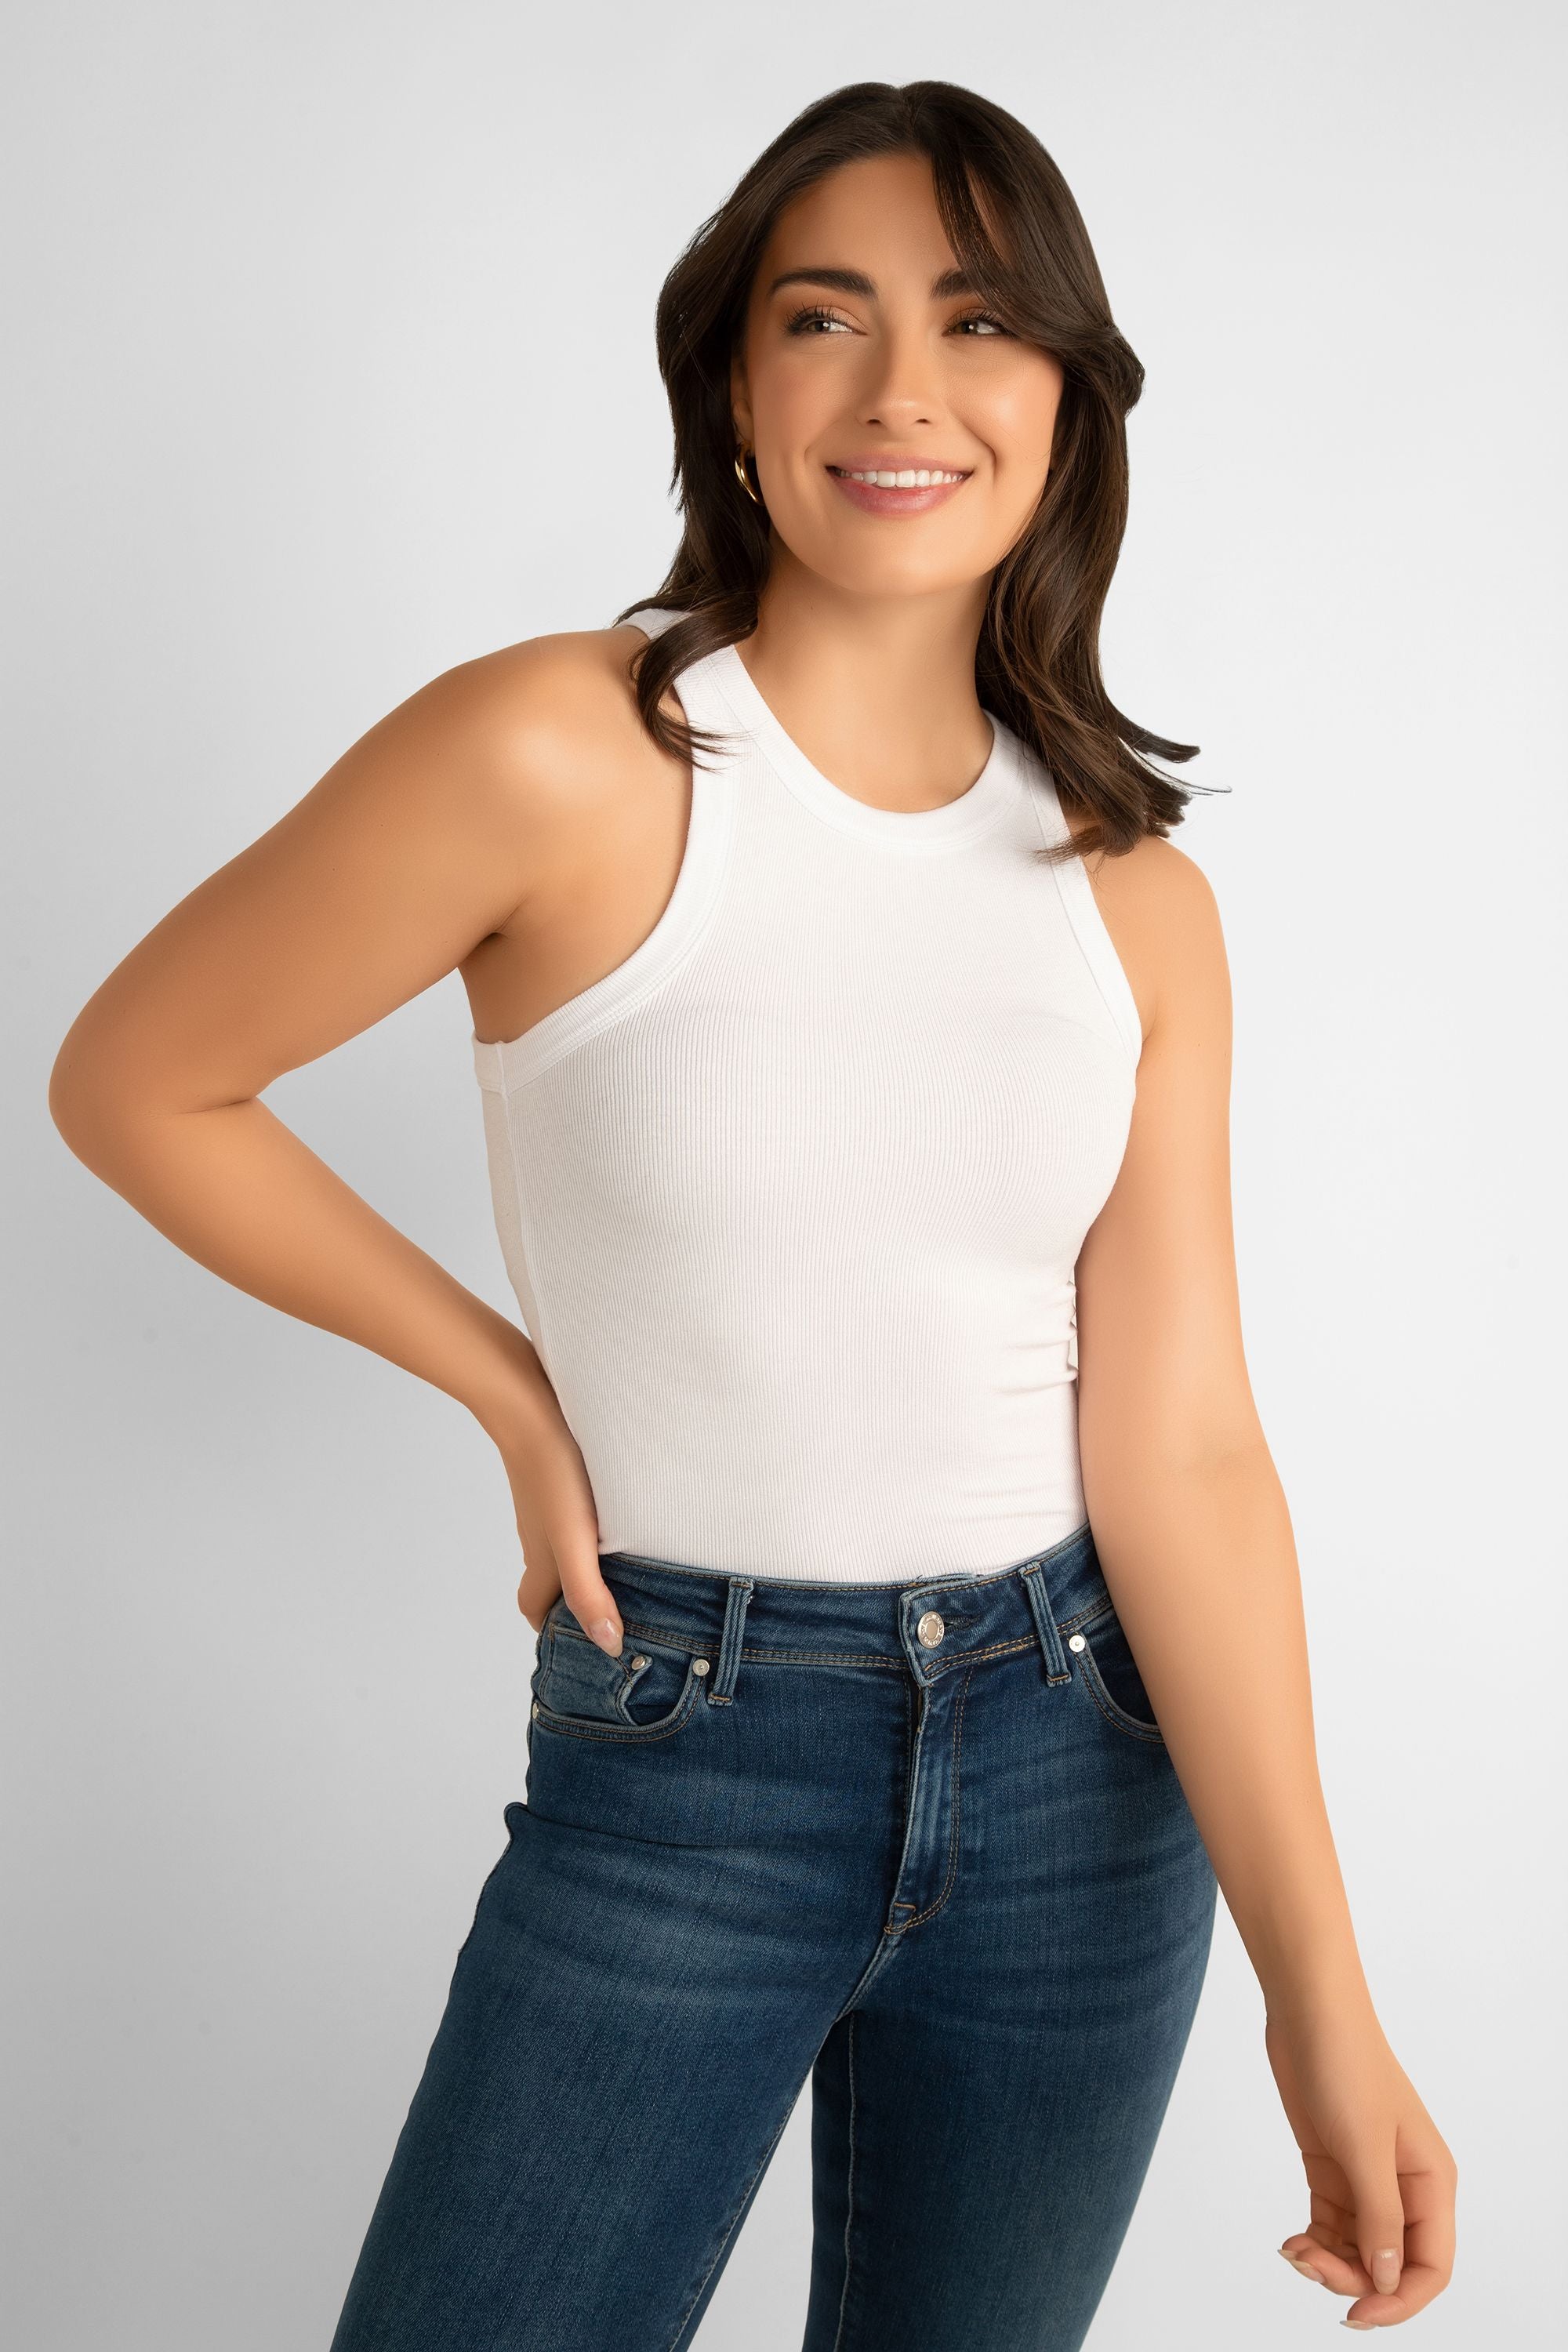 Pink Martini (TO-679542) The Danika Top - Women's Classic Ribbed Knit, Racerback Tank Top in White